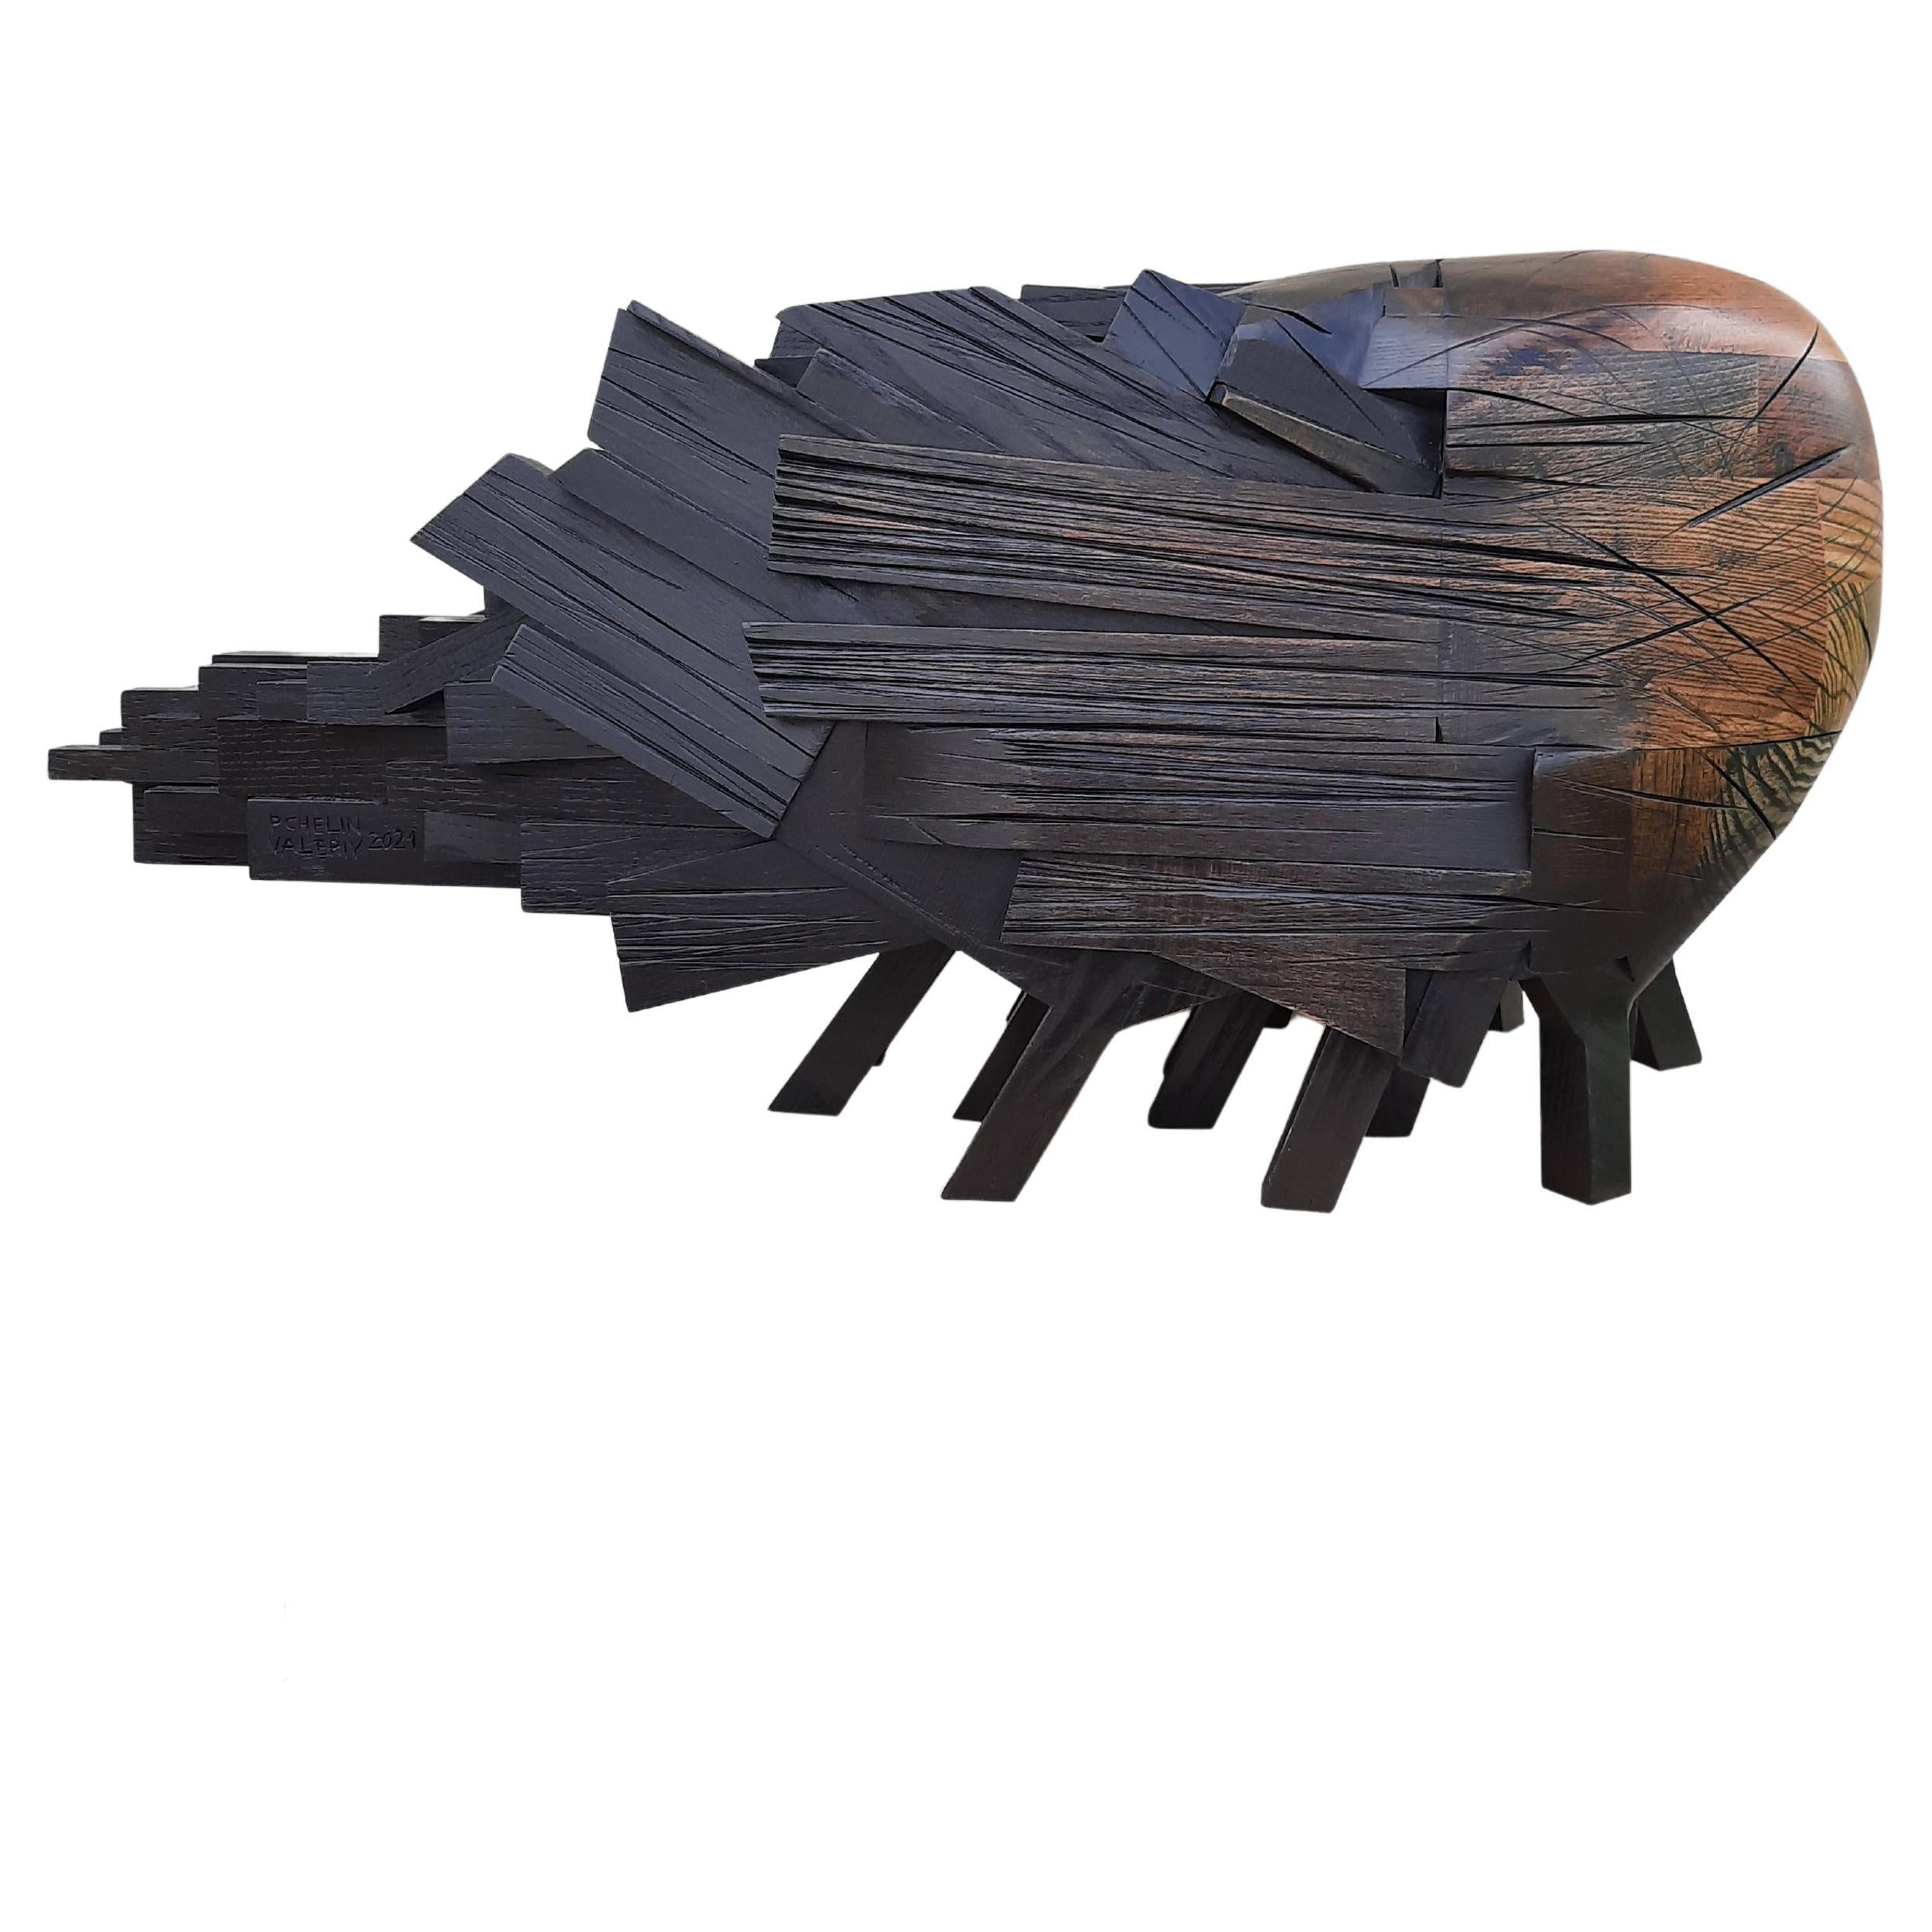 Contemporary Beechwood Sculpture Drifter 11 by Valery Pchelin For Sale